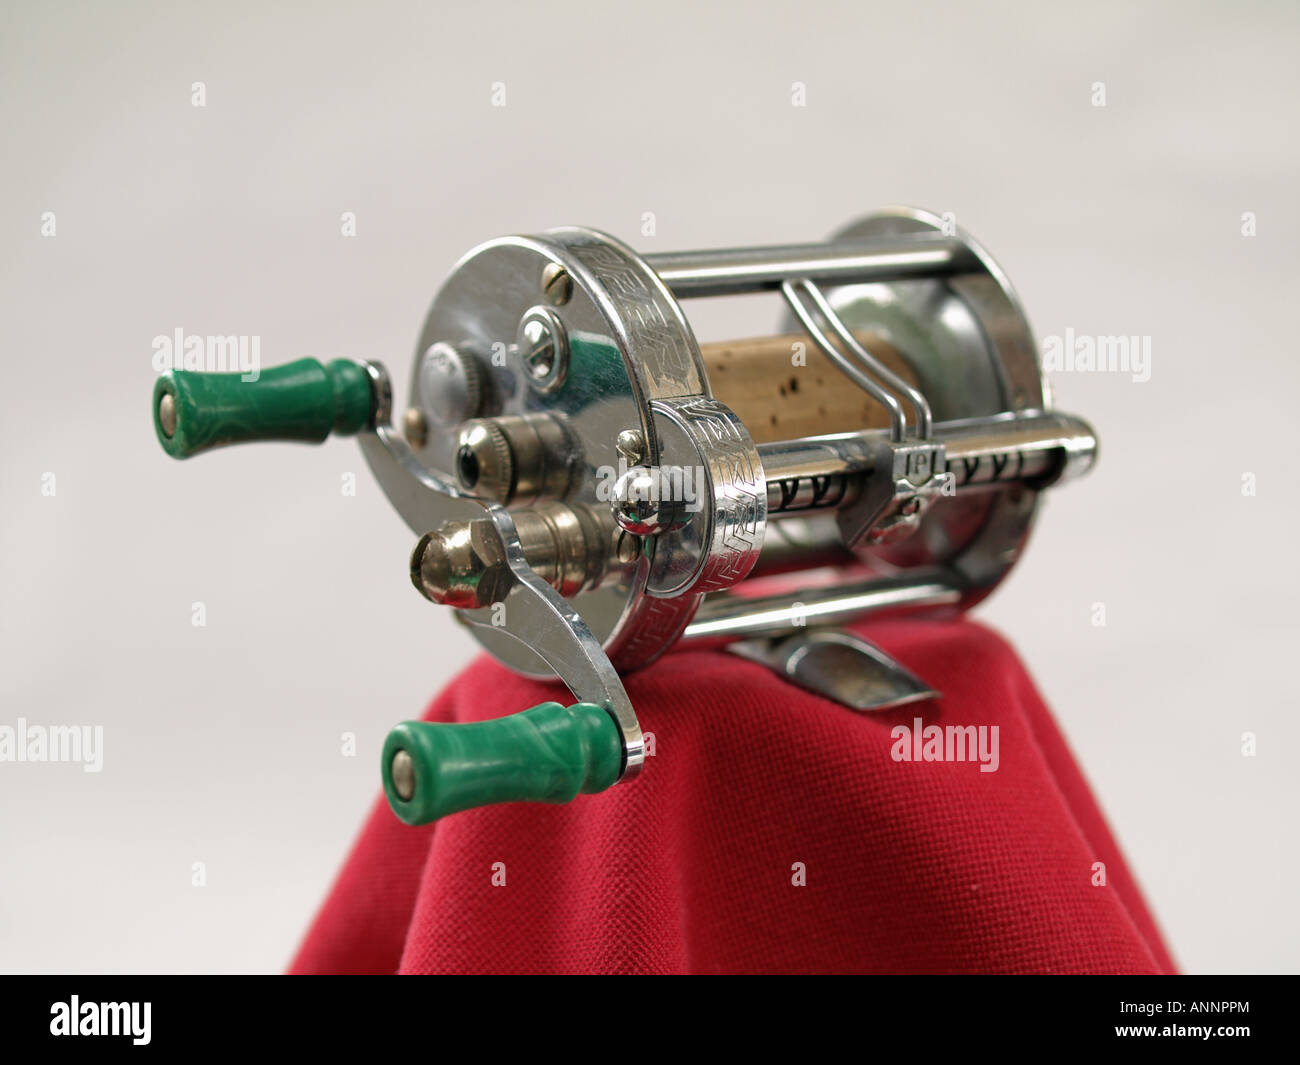 Detail of an antique bait casting fishing reel or simply casting reel made  about 1935 by the Pflueger Company from Akron Ohio Stock Photo - Alamy